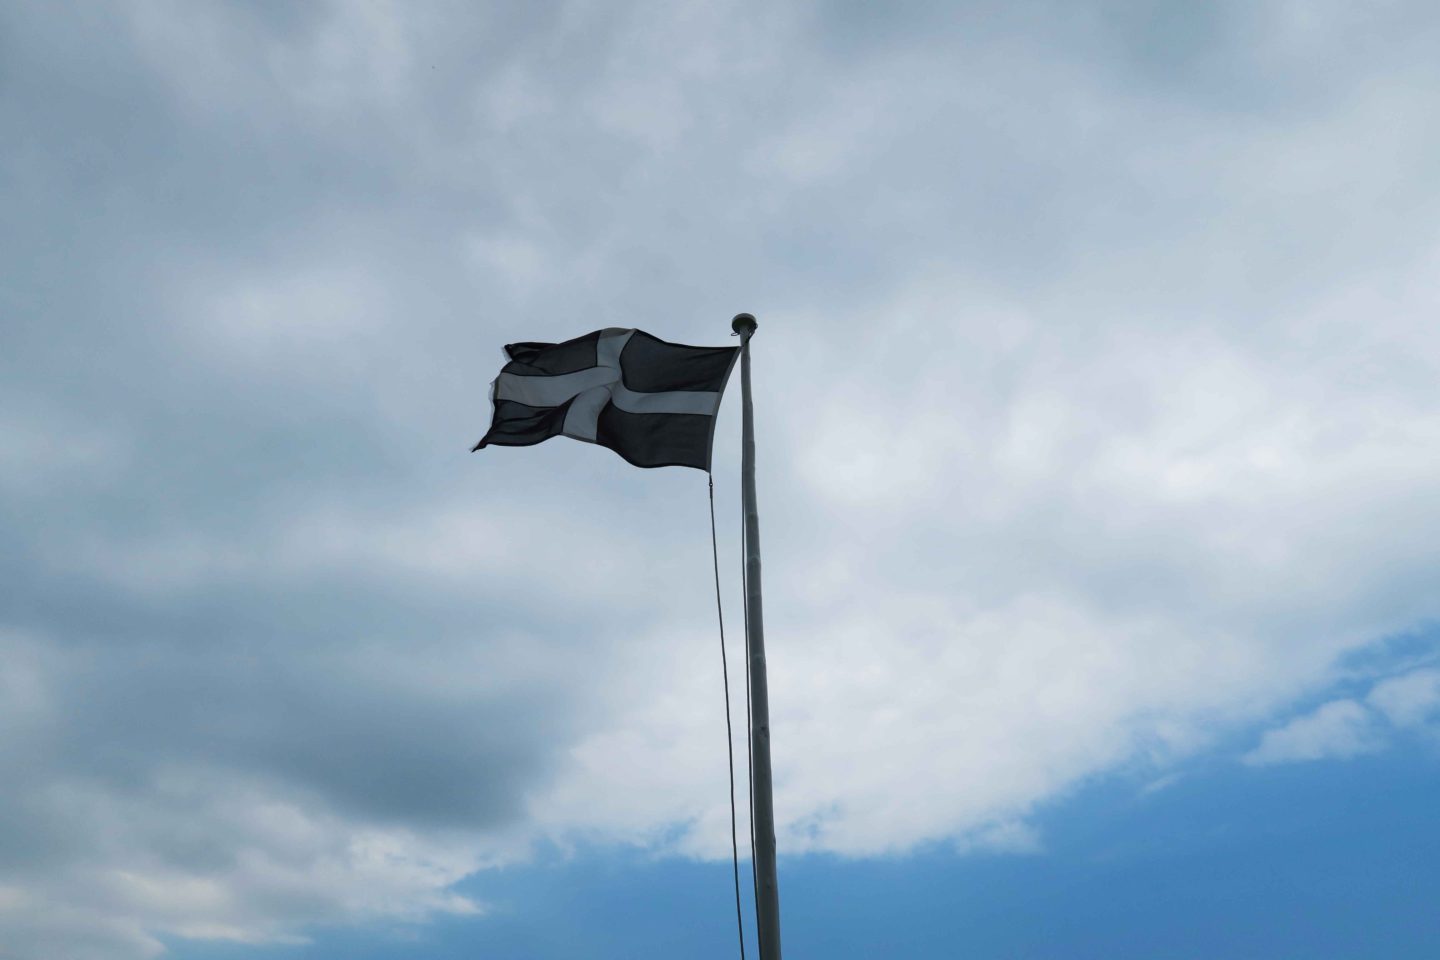 cornish flag flying above st miachel's mount in cornwall